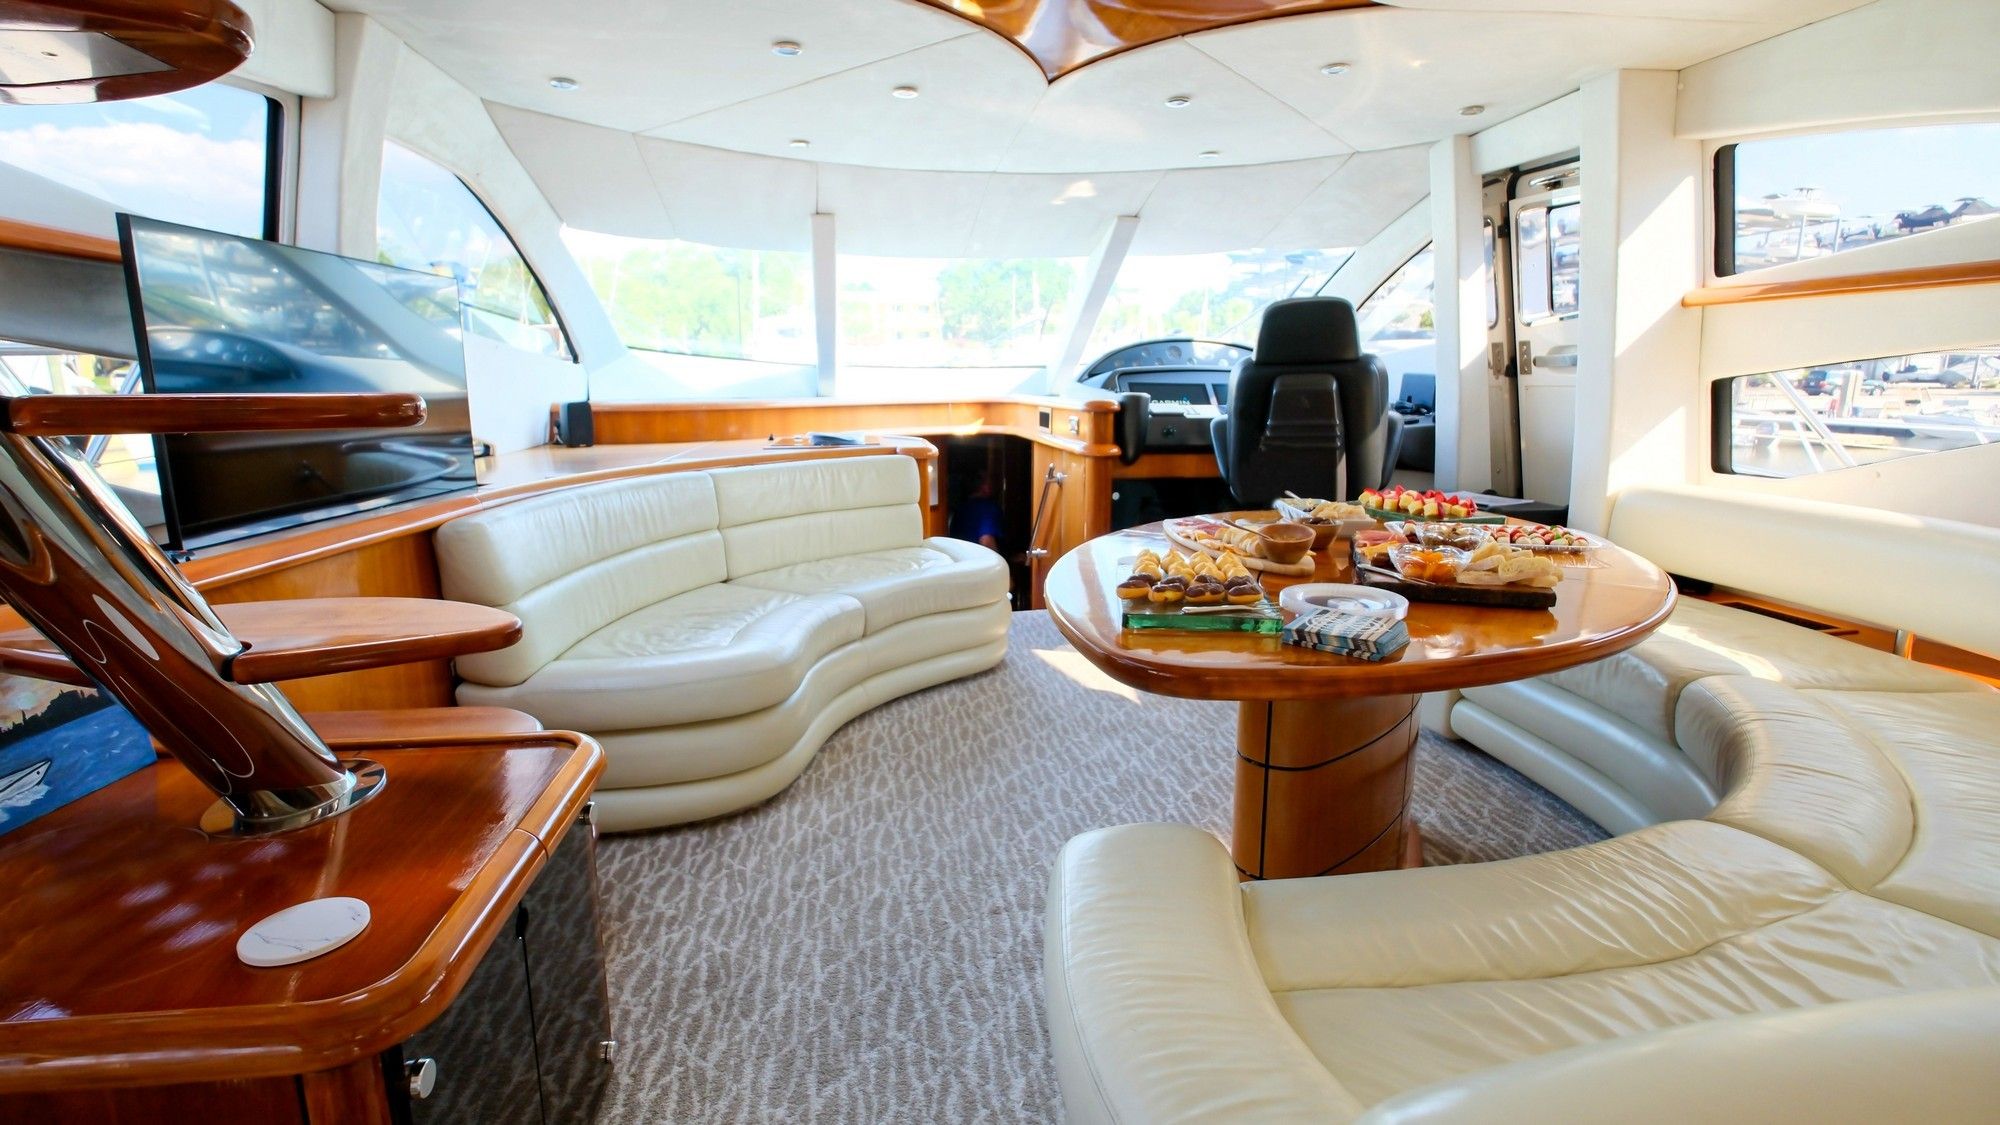 Indulge in a remarkable day of luxury on board Lady Sadie, Charleston's finest charter yacht.